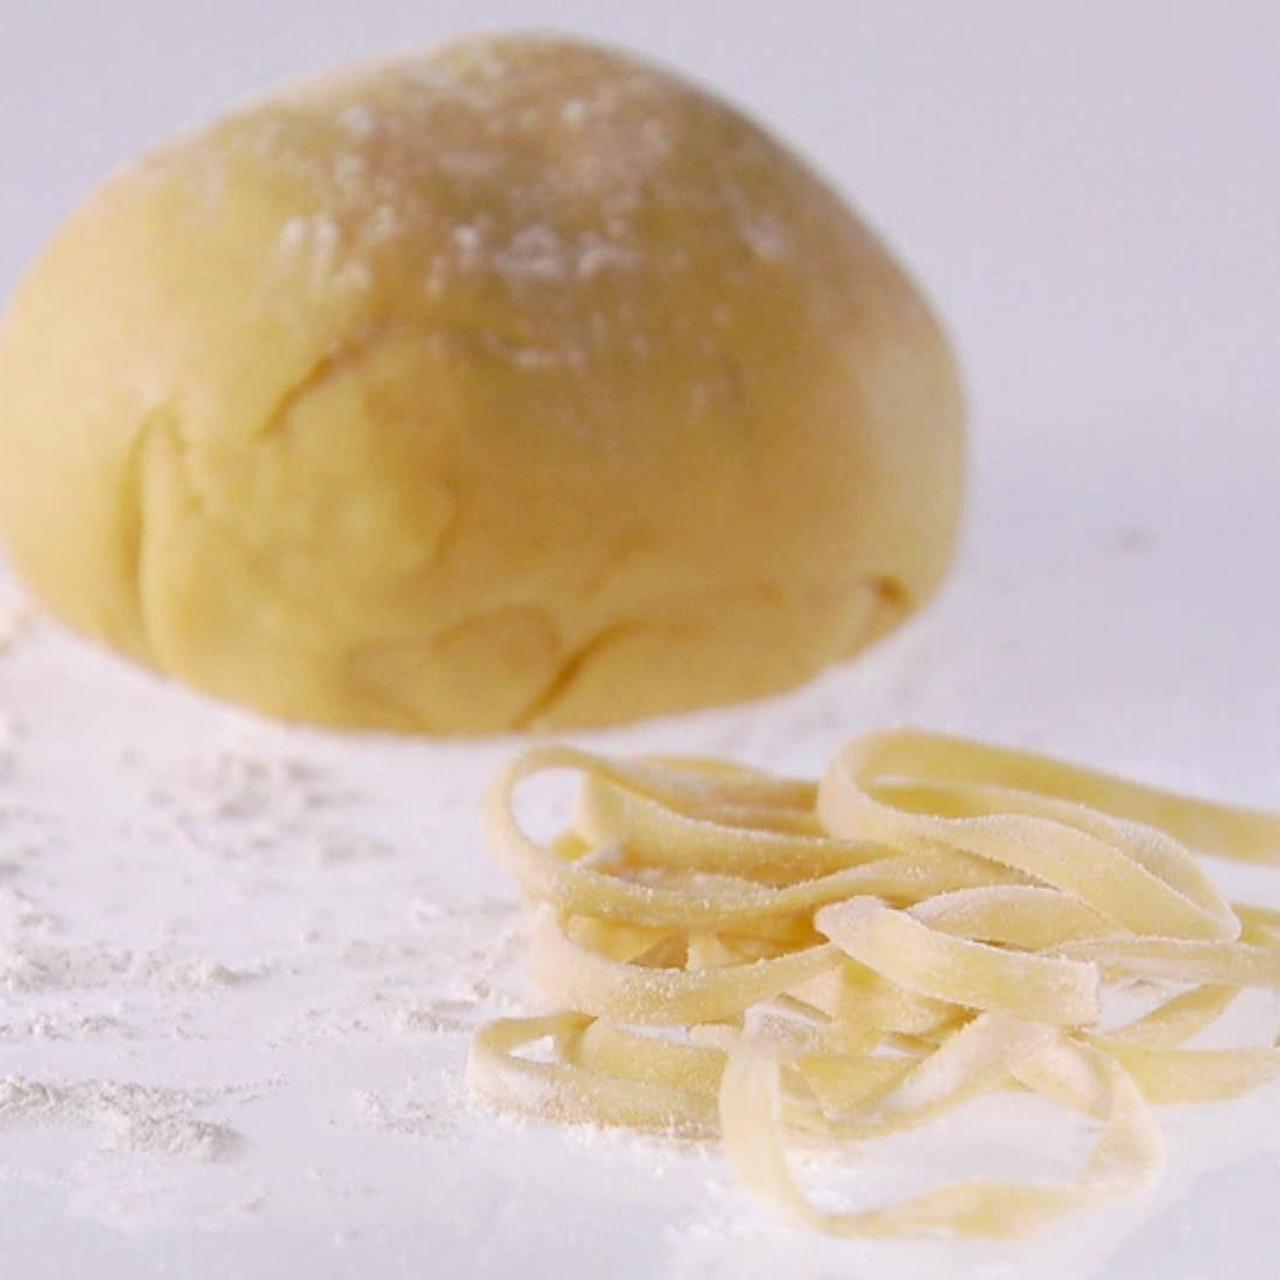 2 Ingredient Homemade Pasta Recipe (Without A Machine)